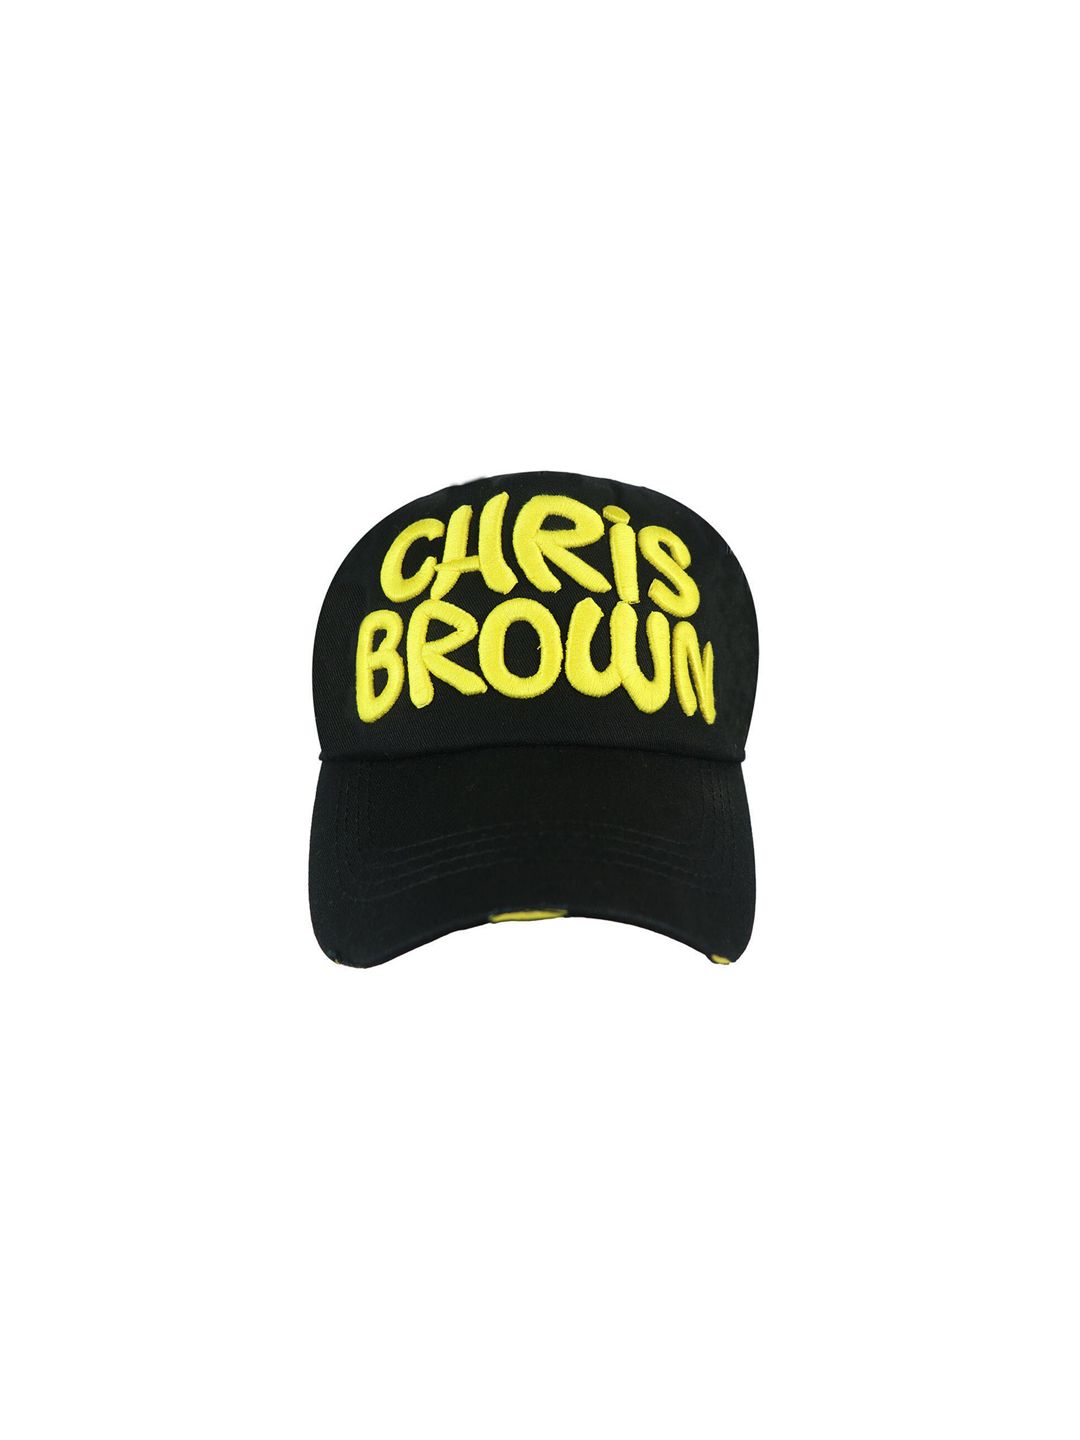 iSWEVEN Unisex Black & Yellow Embroidered Snapback Cap Price in India